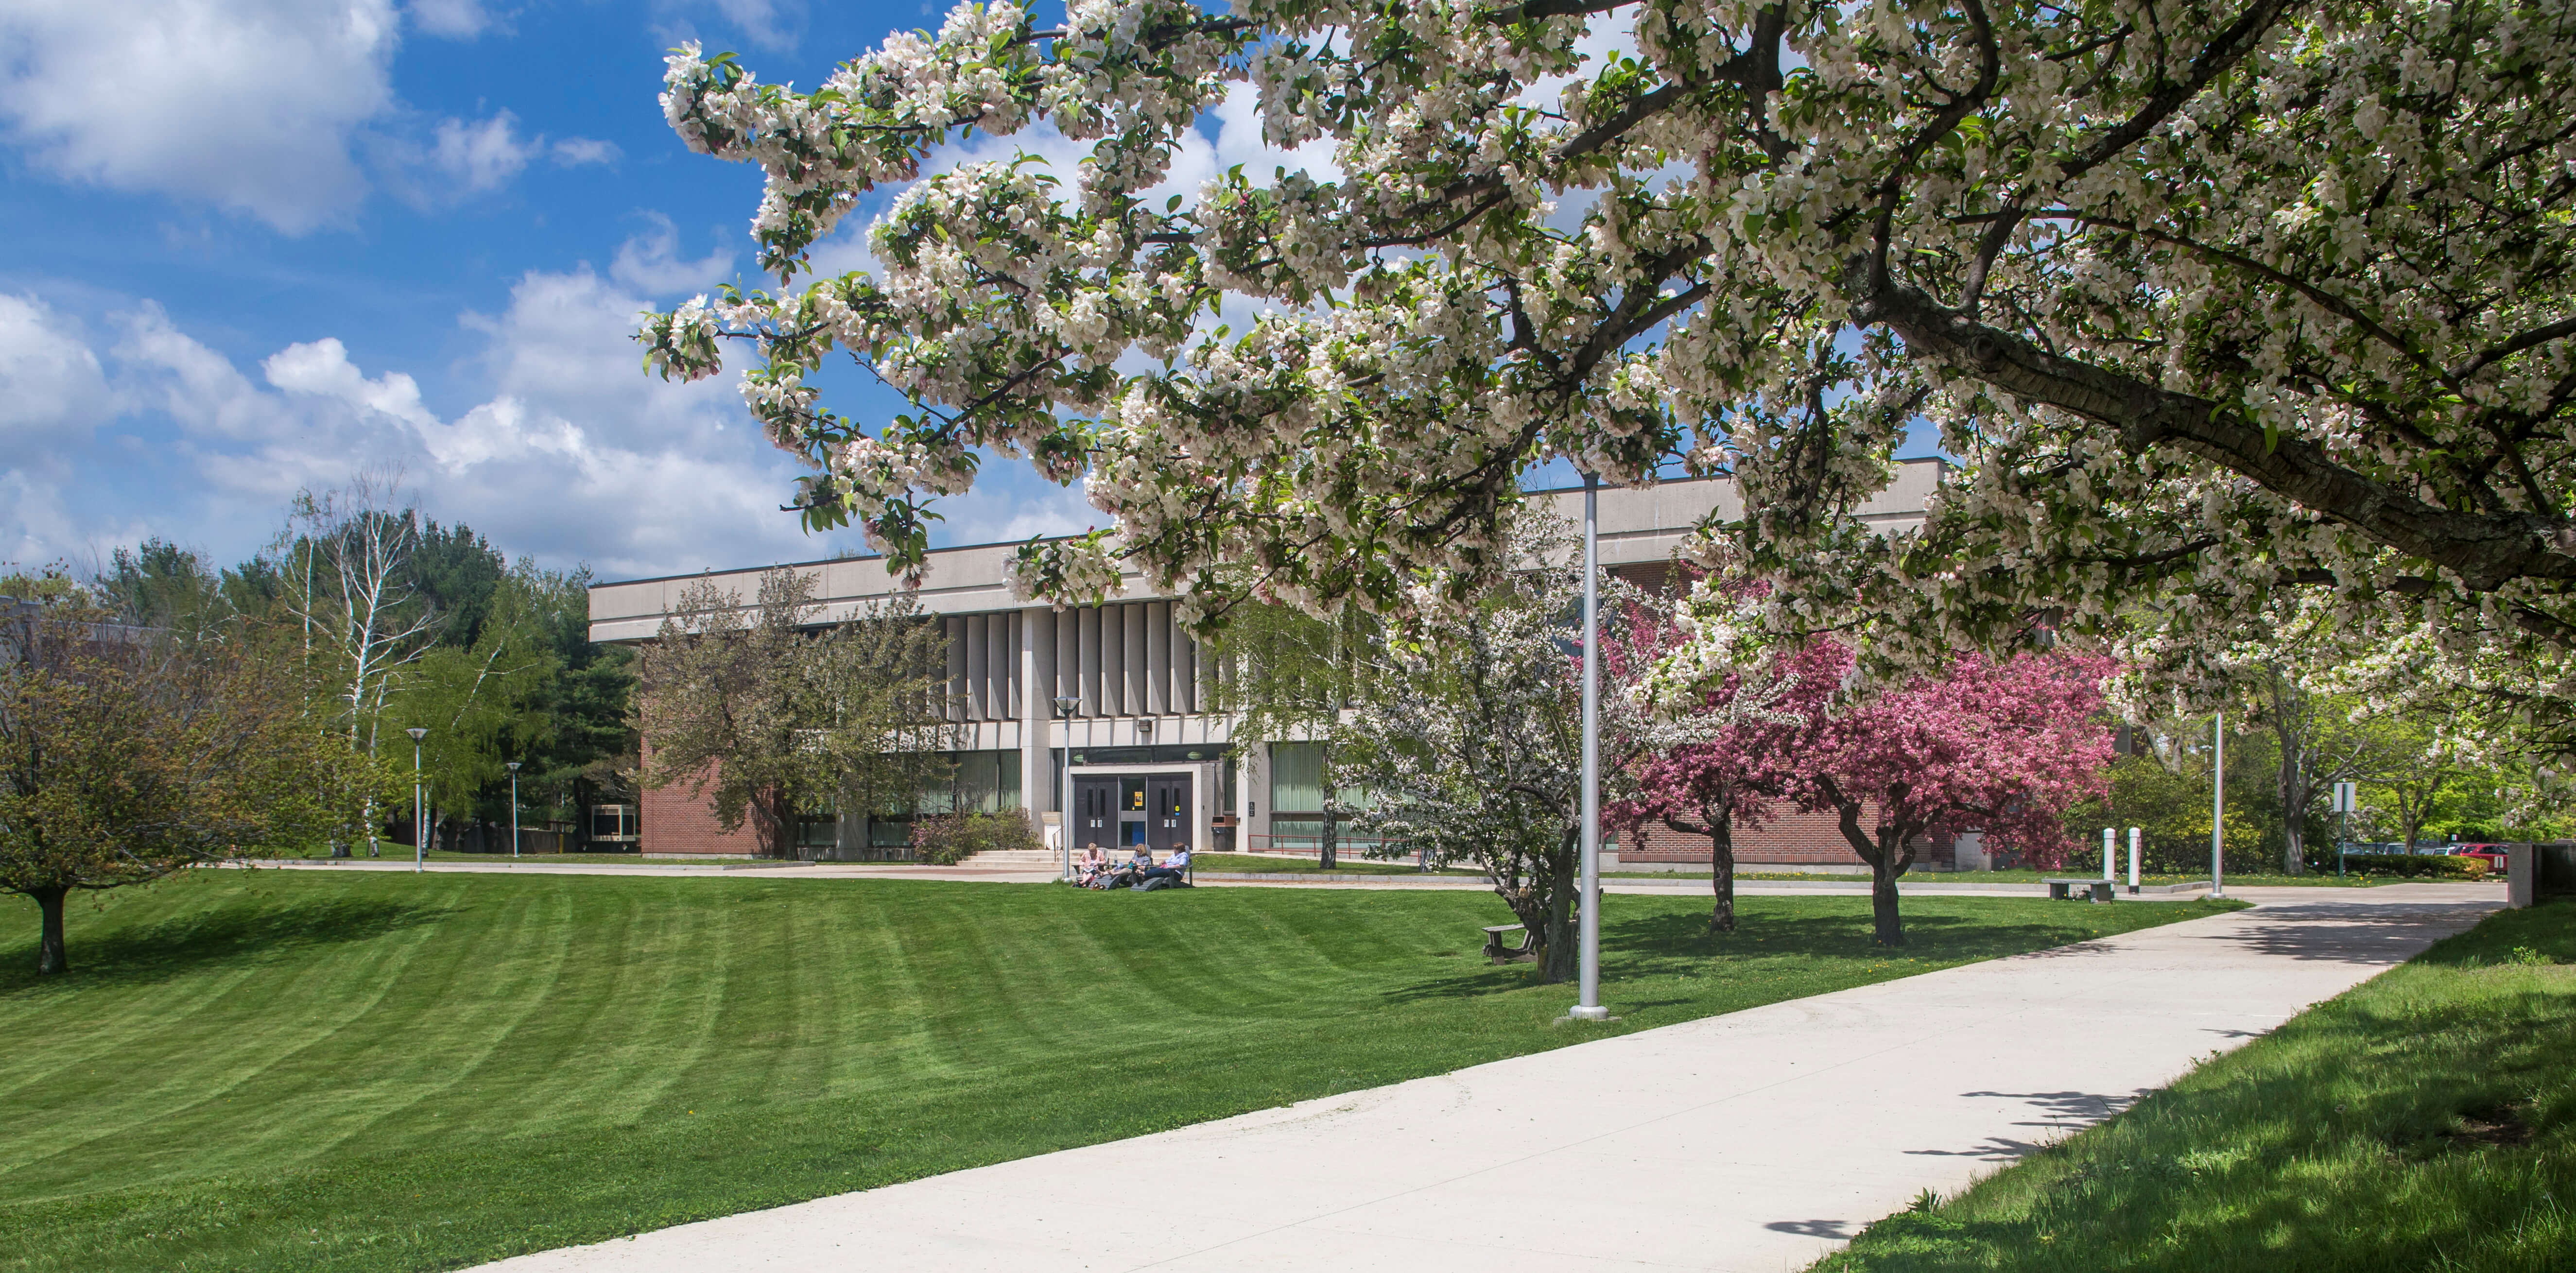 Photo of the Haverhill Campus in Spring